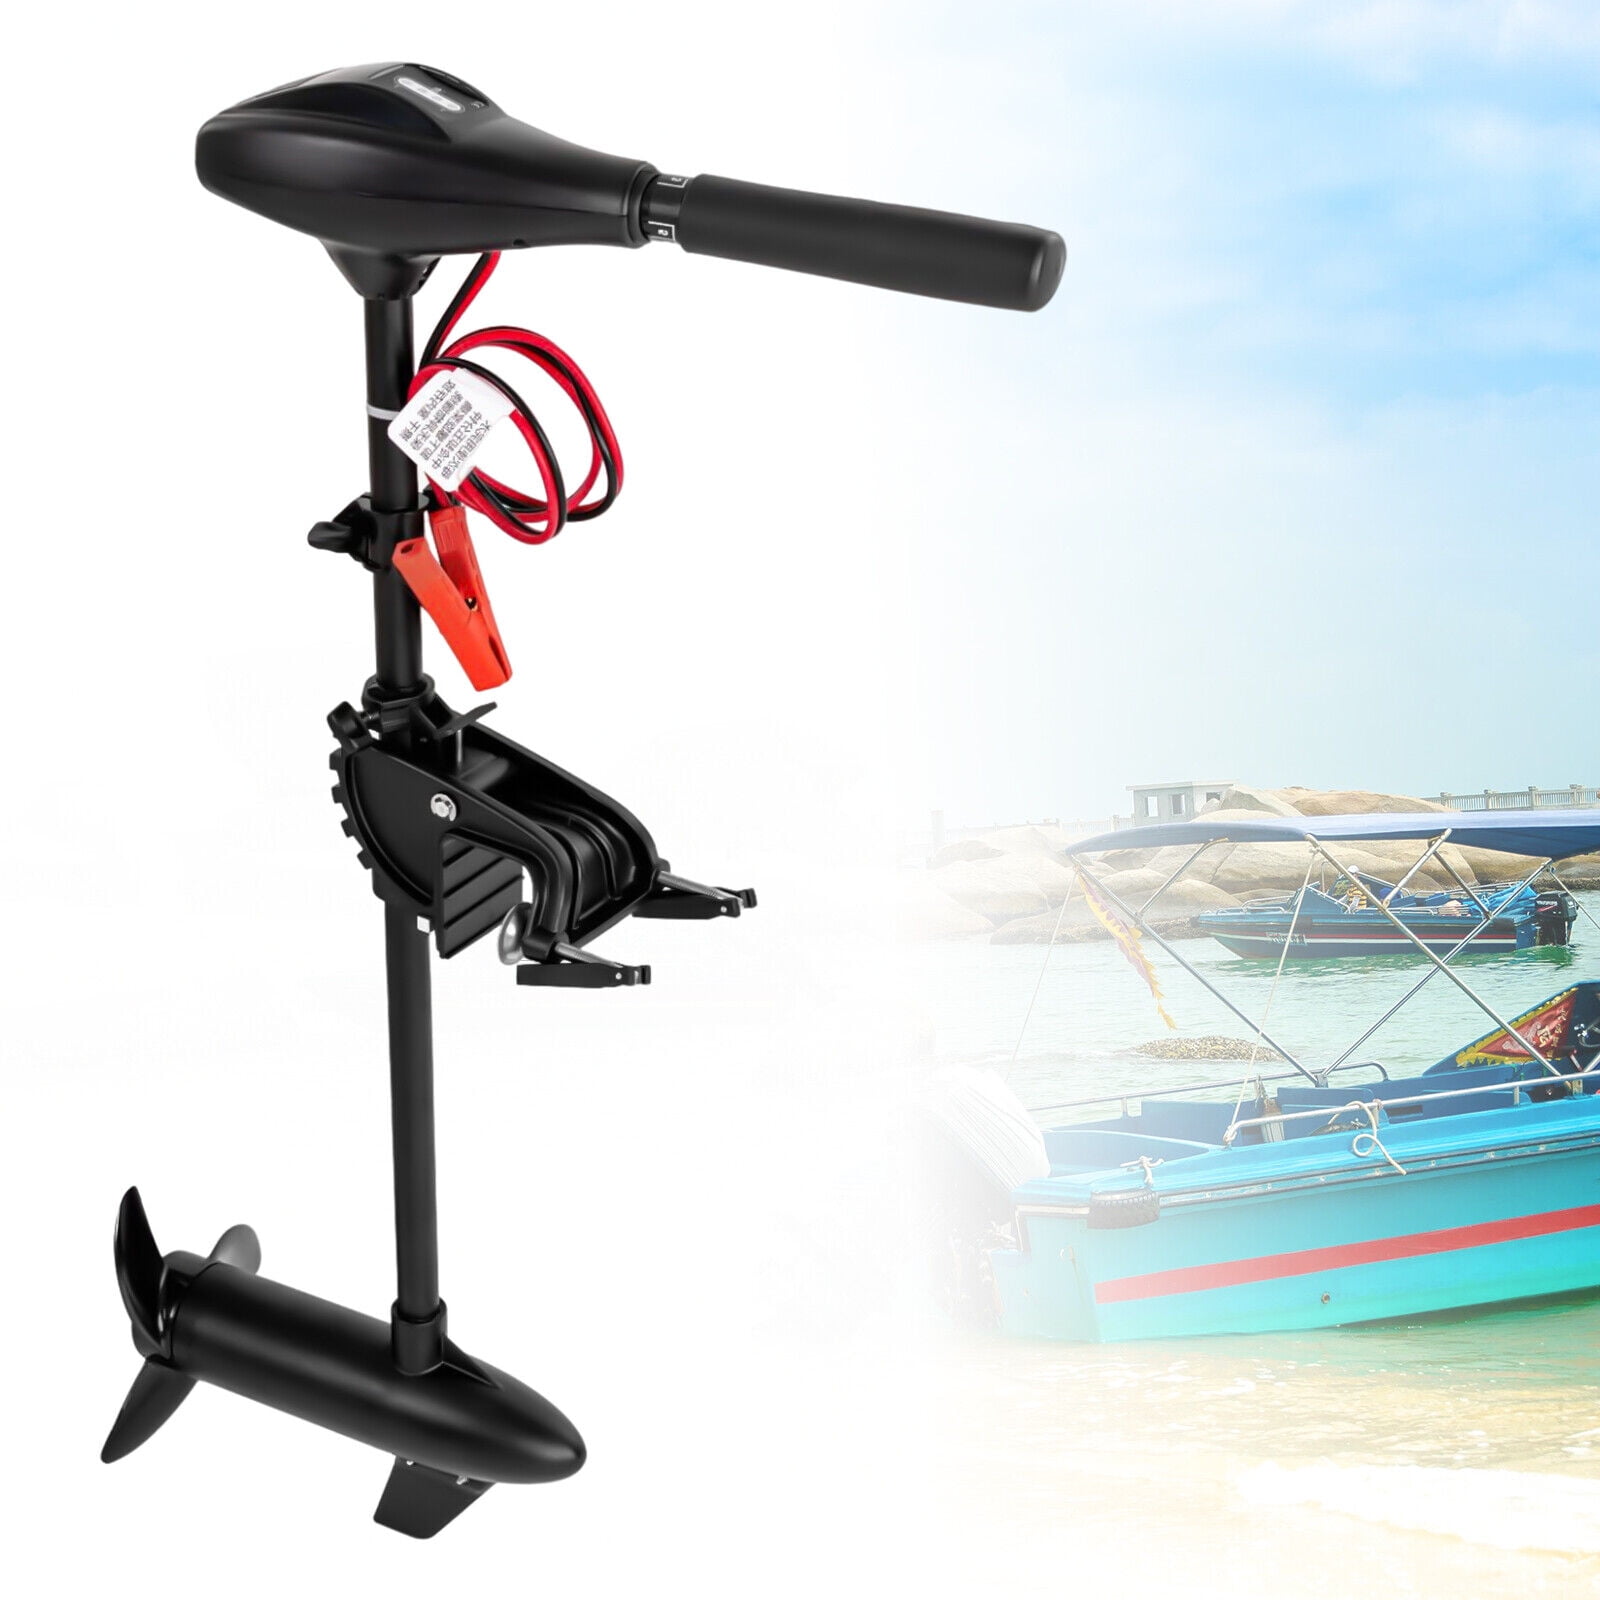 12V 58LBS Thrust Electric Trolling Motor Rubber Inflatable Fishing